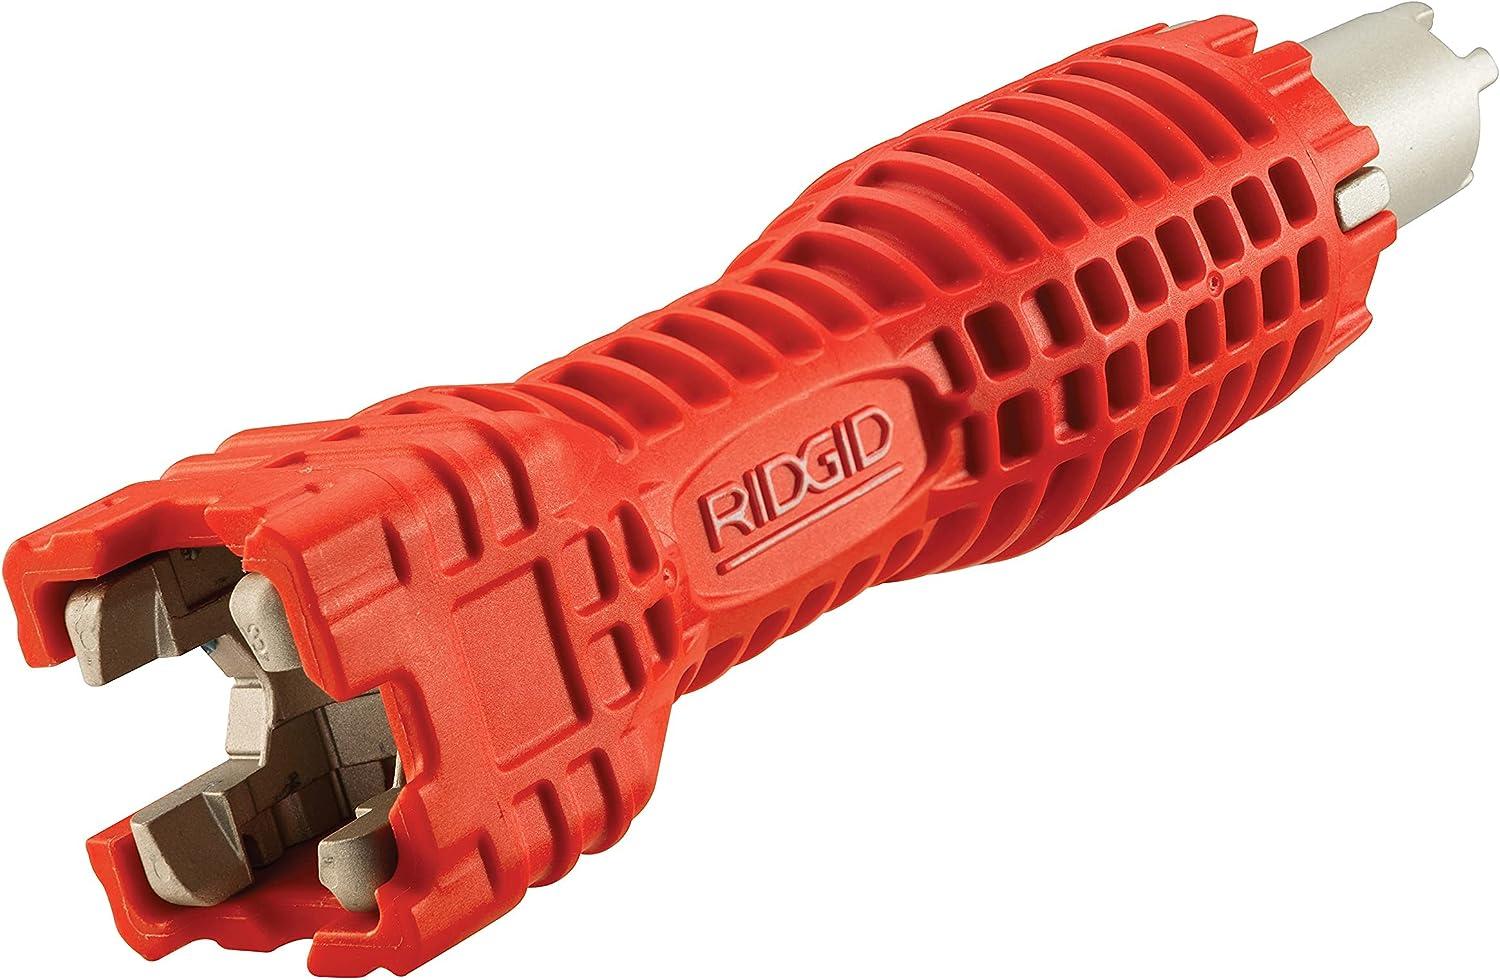 Ridgid EZ Change Plumbing Wrench Faucet Installation and Removal Tool for $15.88